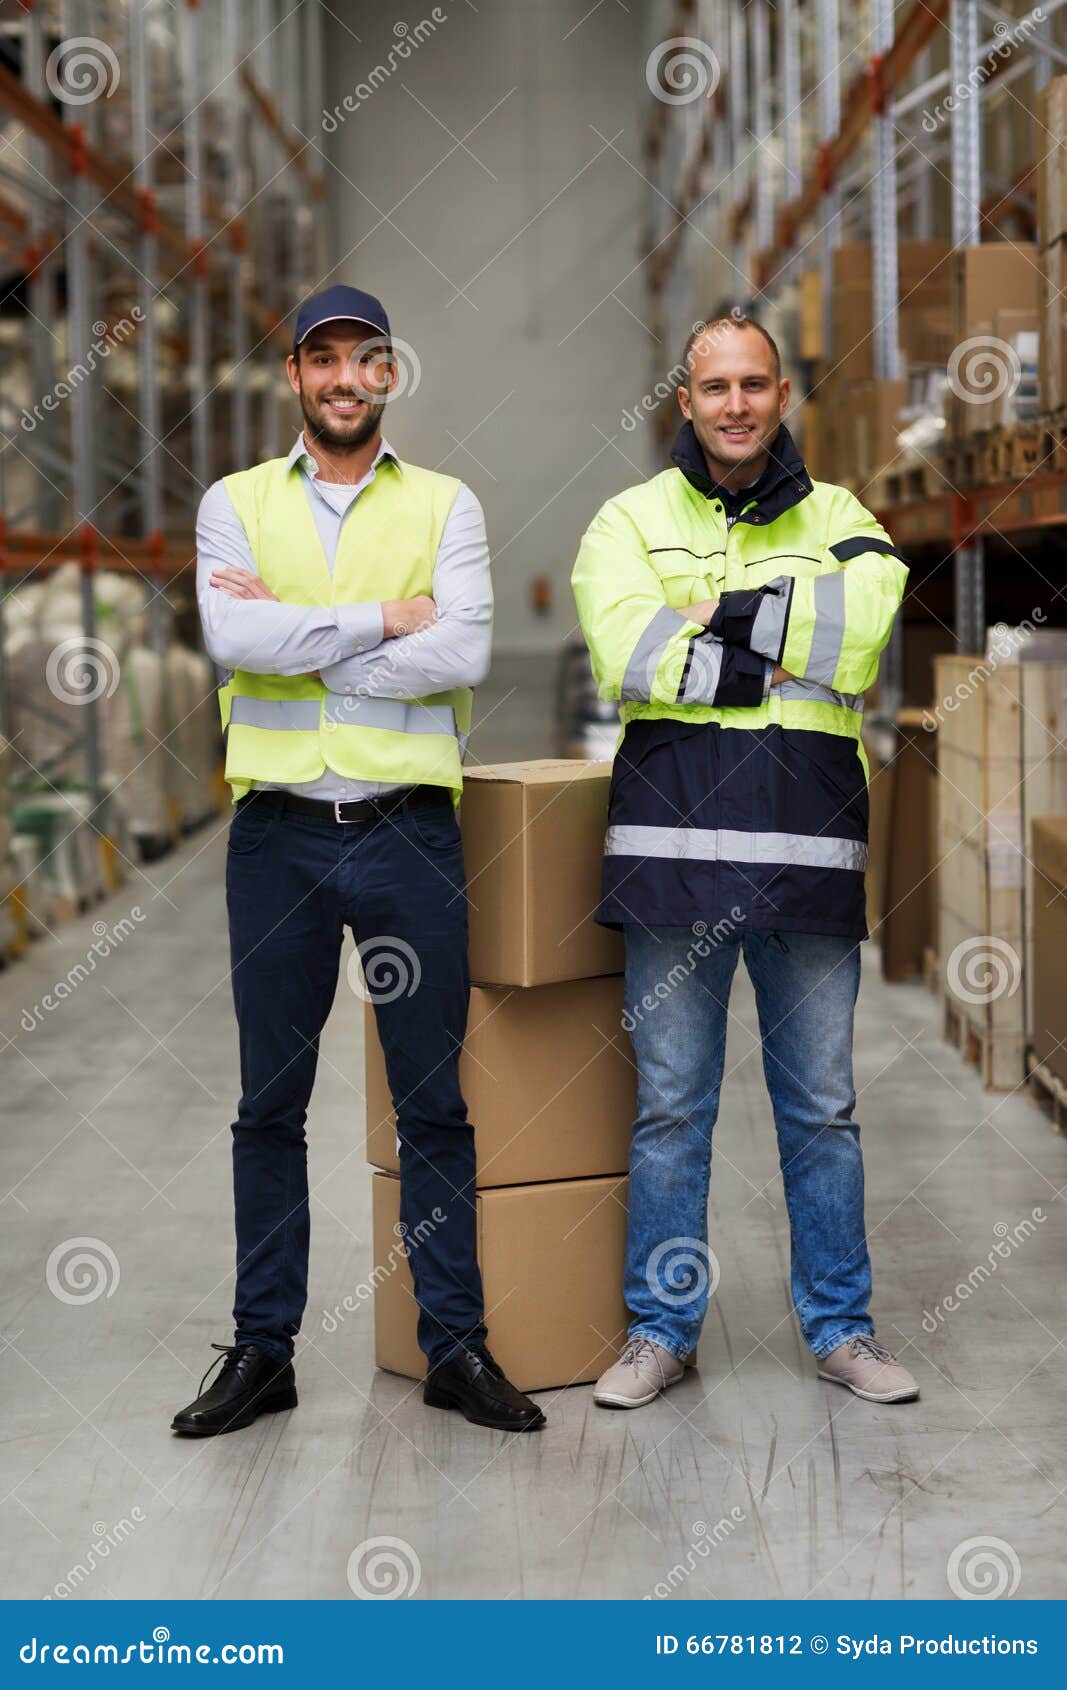 Men in Uniform with Boxes at Warehouse Stock Photo - Image of